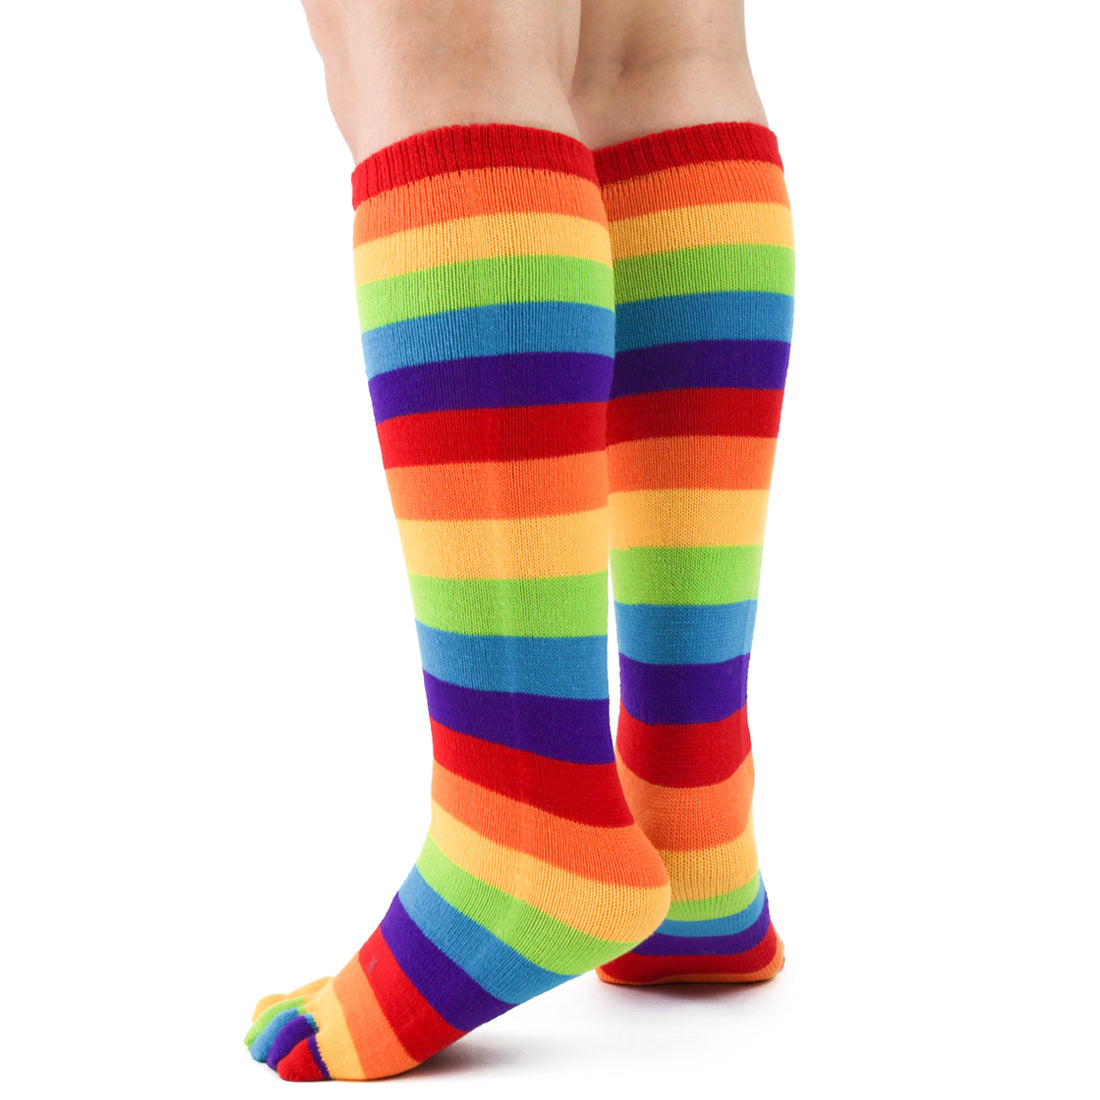 Foot Traffic Rainbow Toe Socks women&#39;s knee high sock featuring socks with five toes and rainbow stripes worn by model seen from back